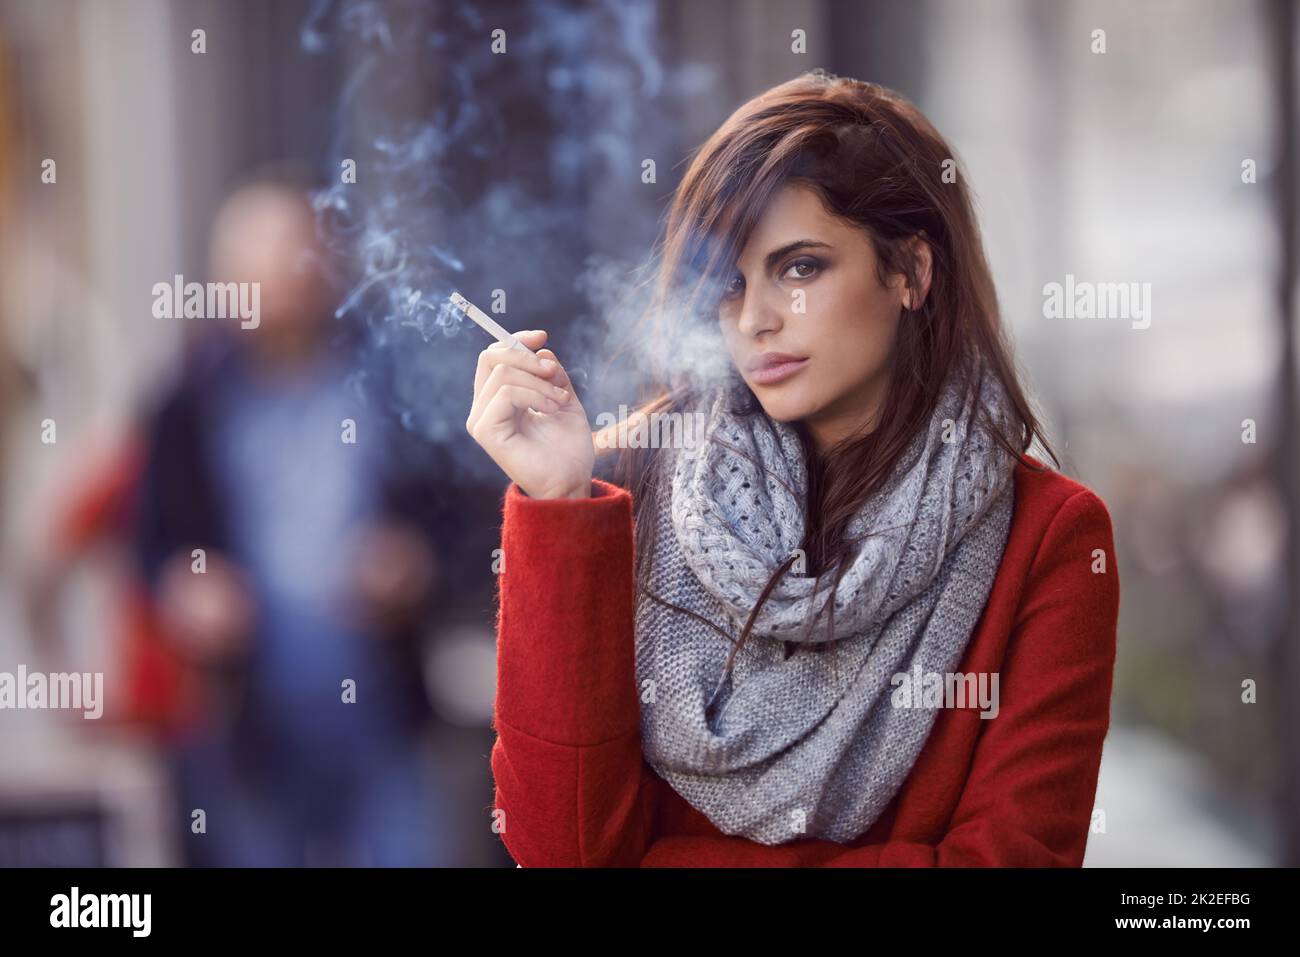 Ill bring the smoke, you bring the fire. Portrait of a beautiful and fashionable young woman smoking a cigarette in an urban setting. Stock Photo